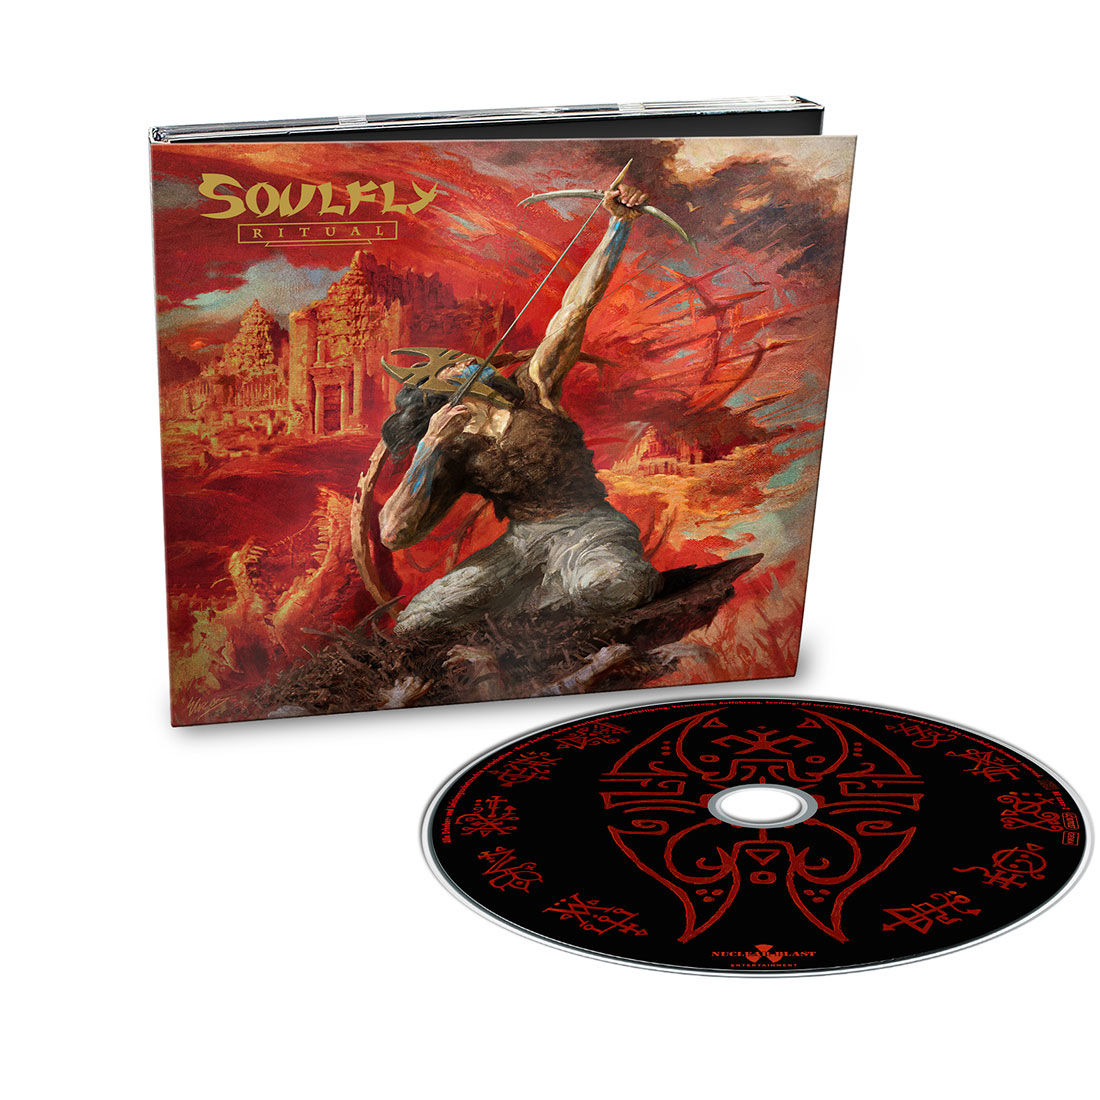 Soulfly - Ritual: Limited CD